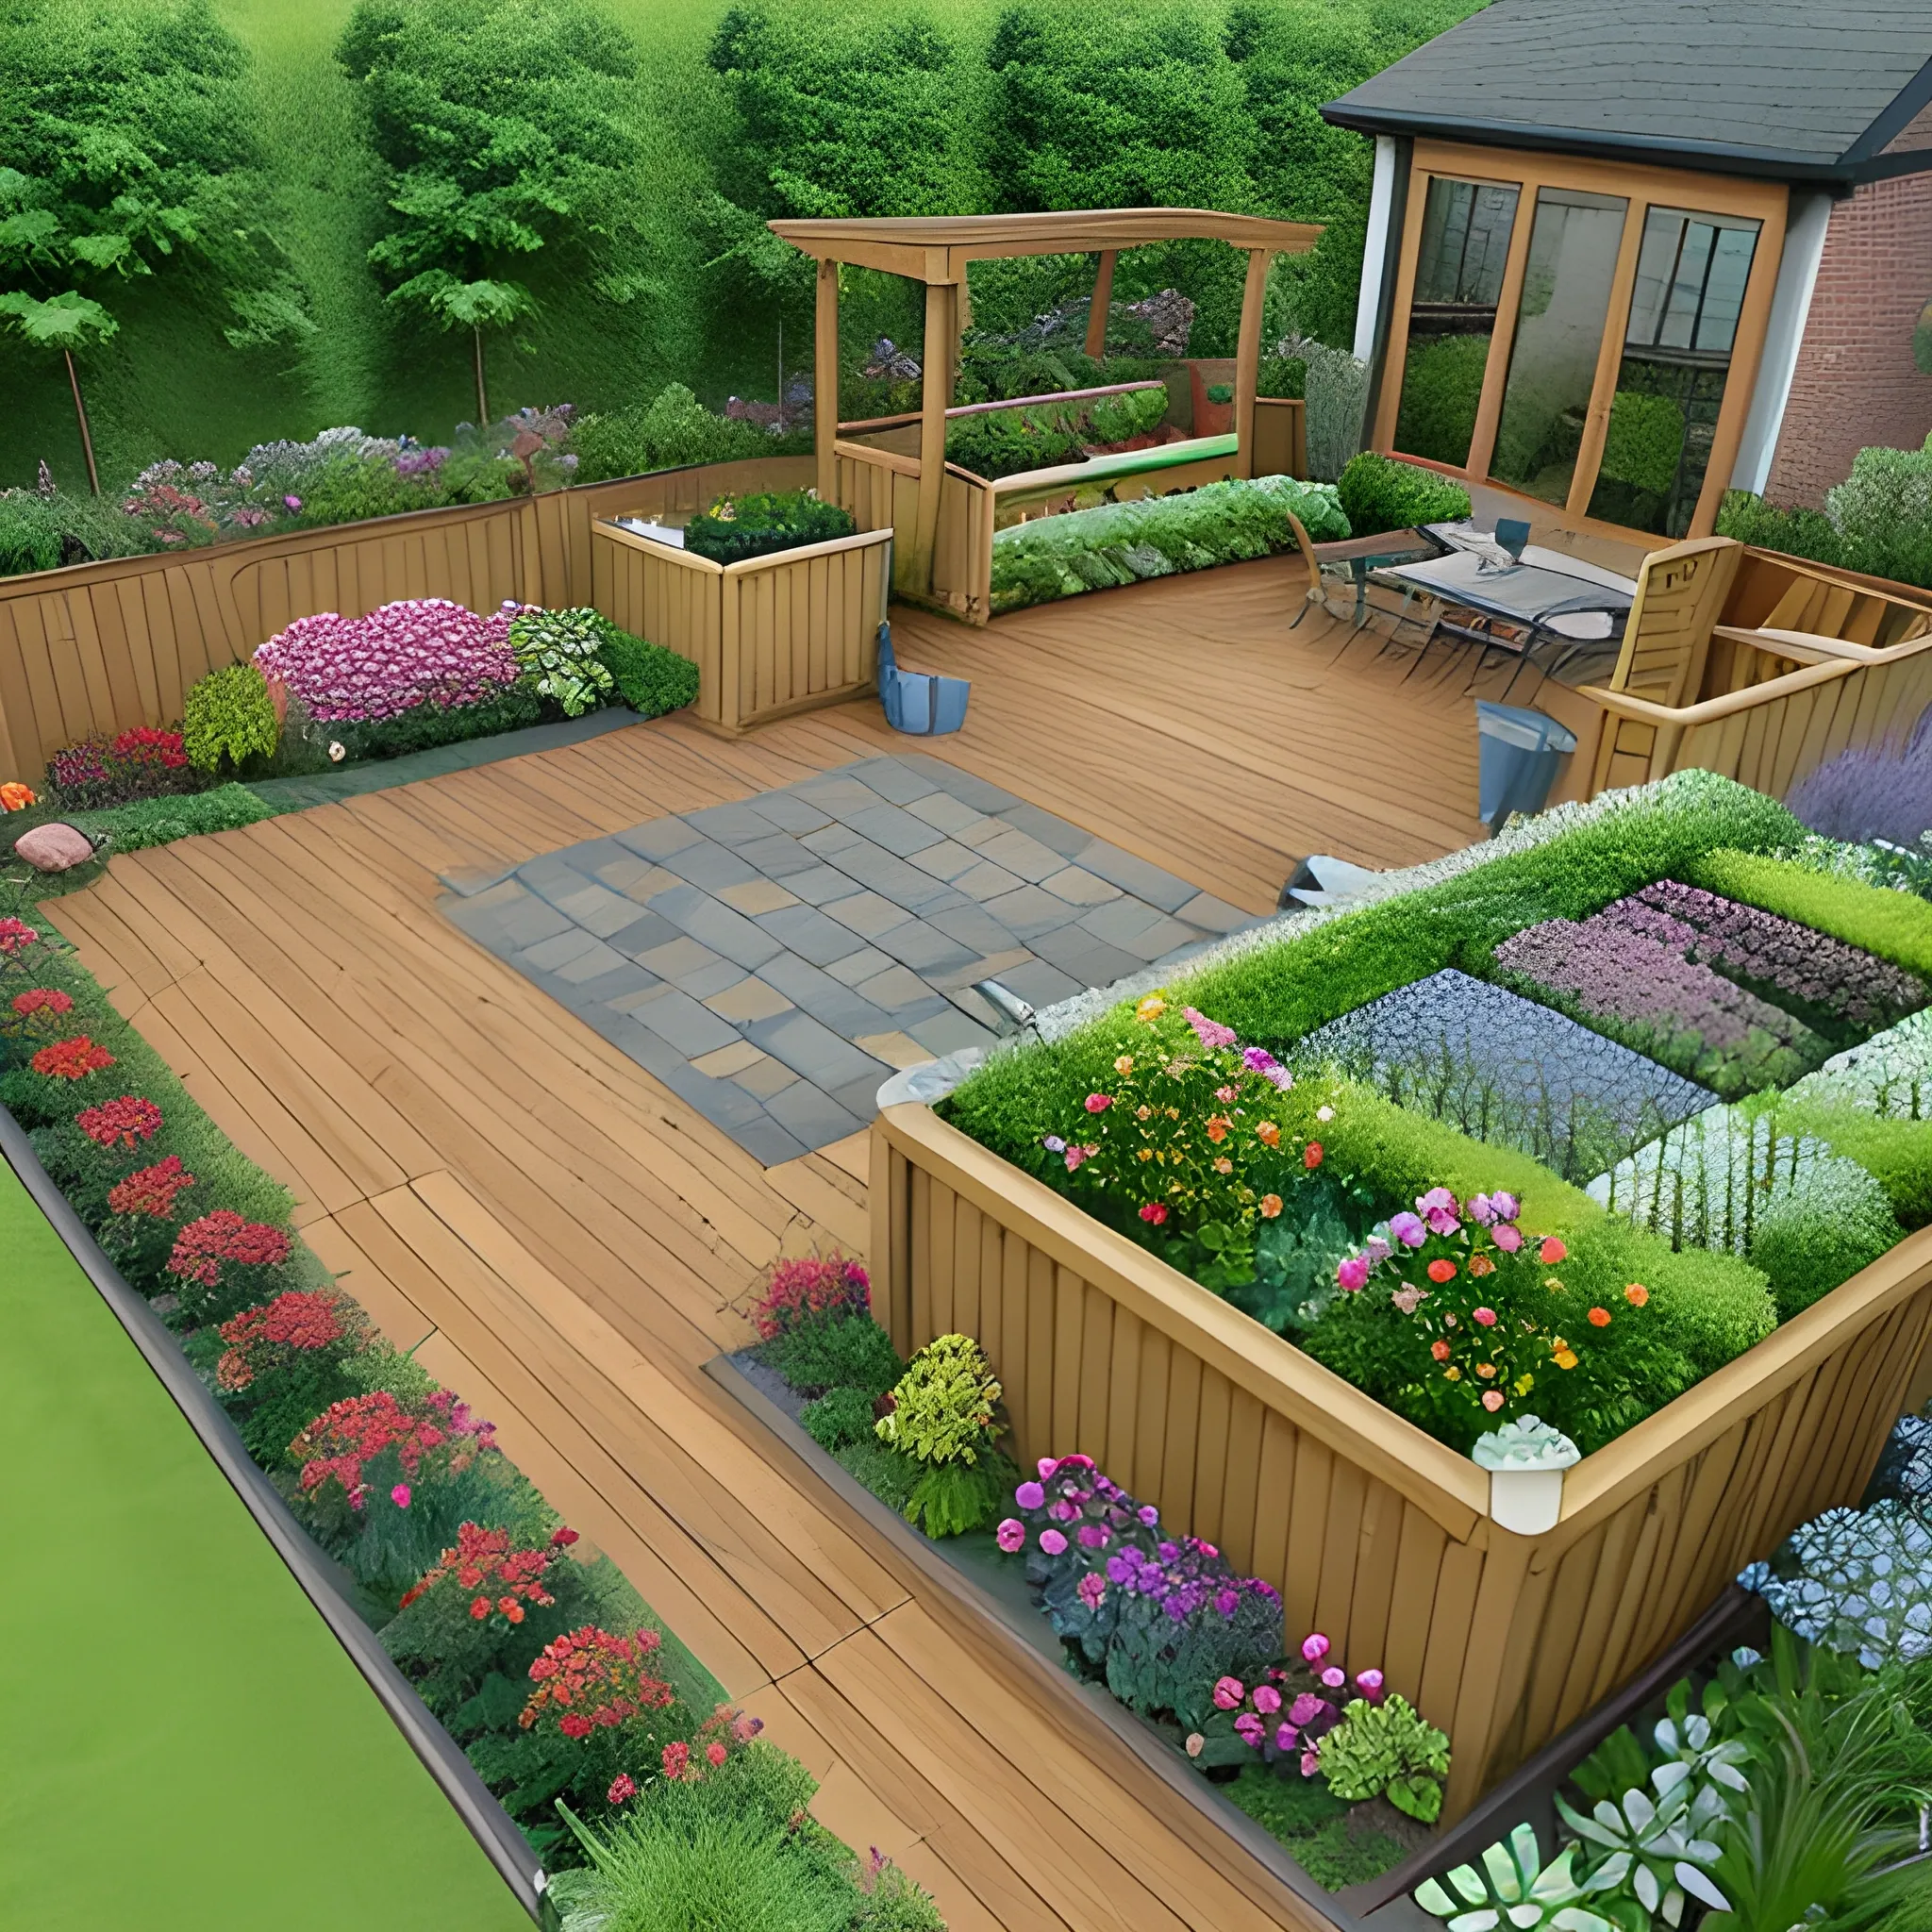 garden layout design, birds-eye view, decking, railway sleepers, planters, flowers, trees, paths, Water Color